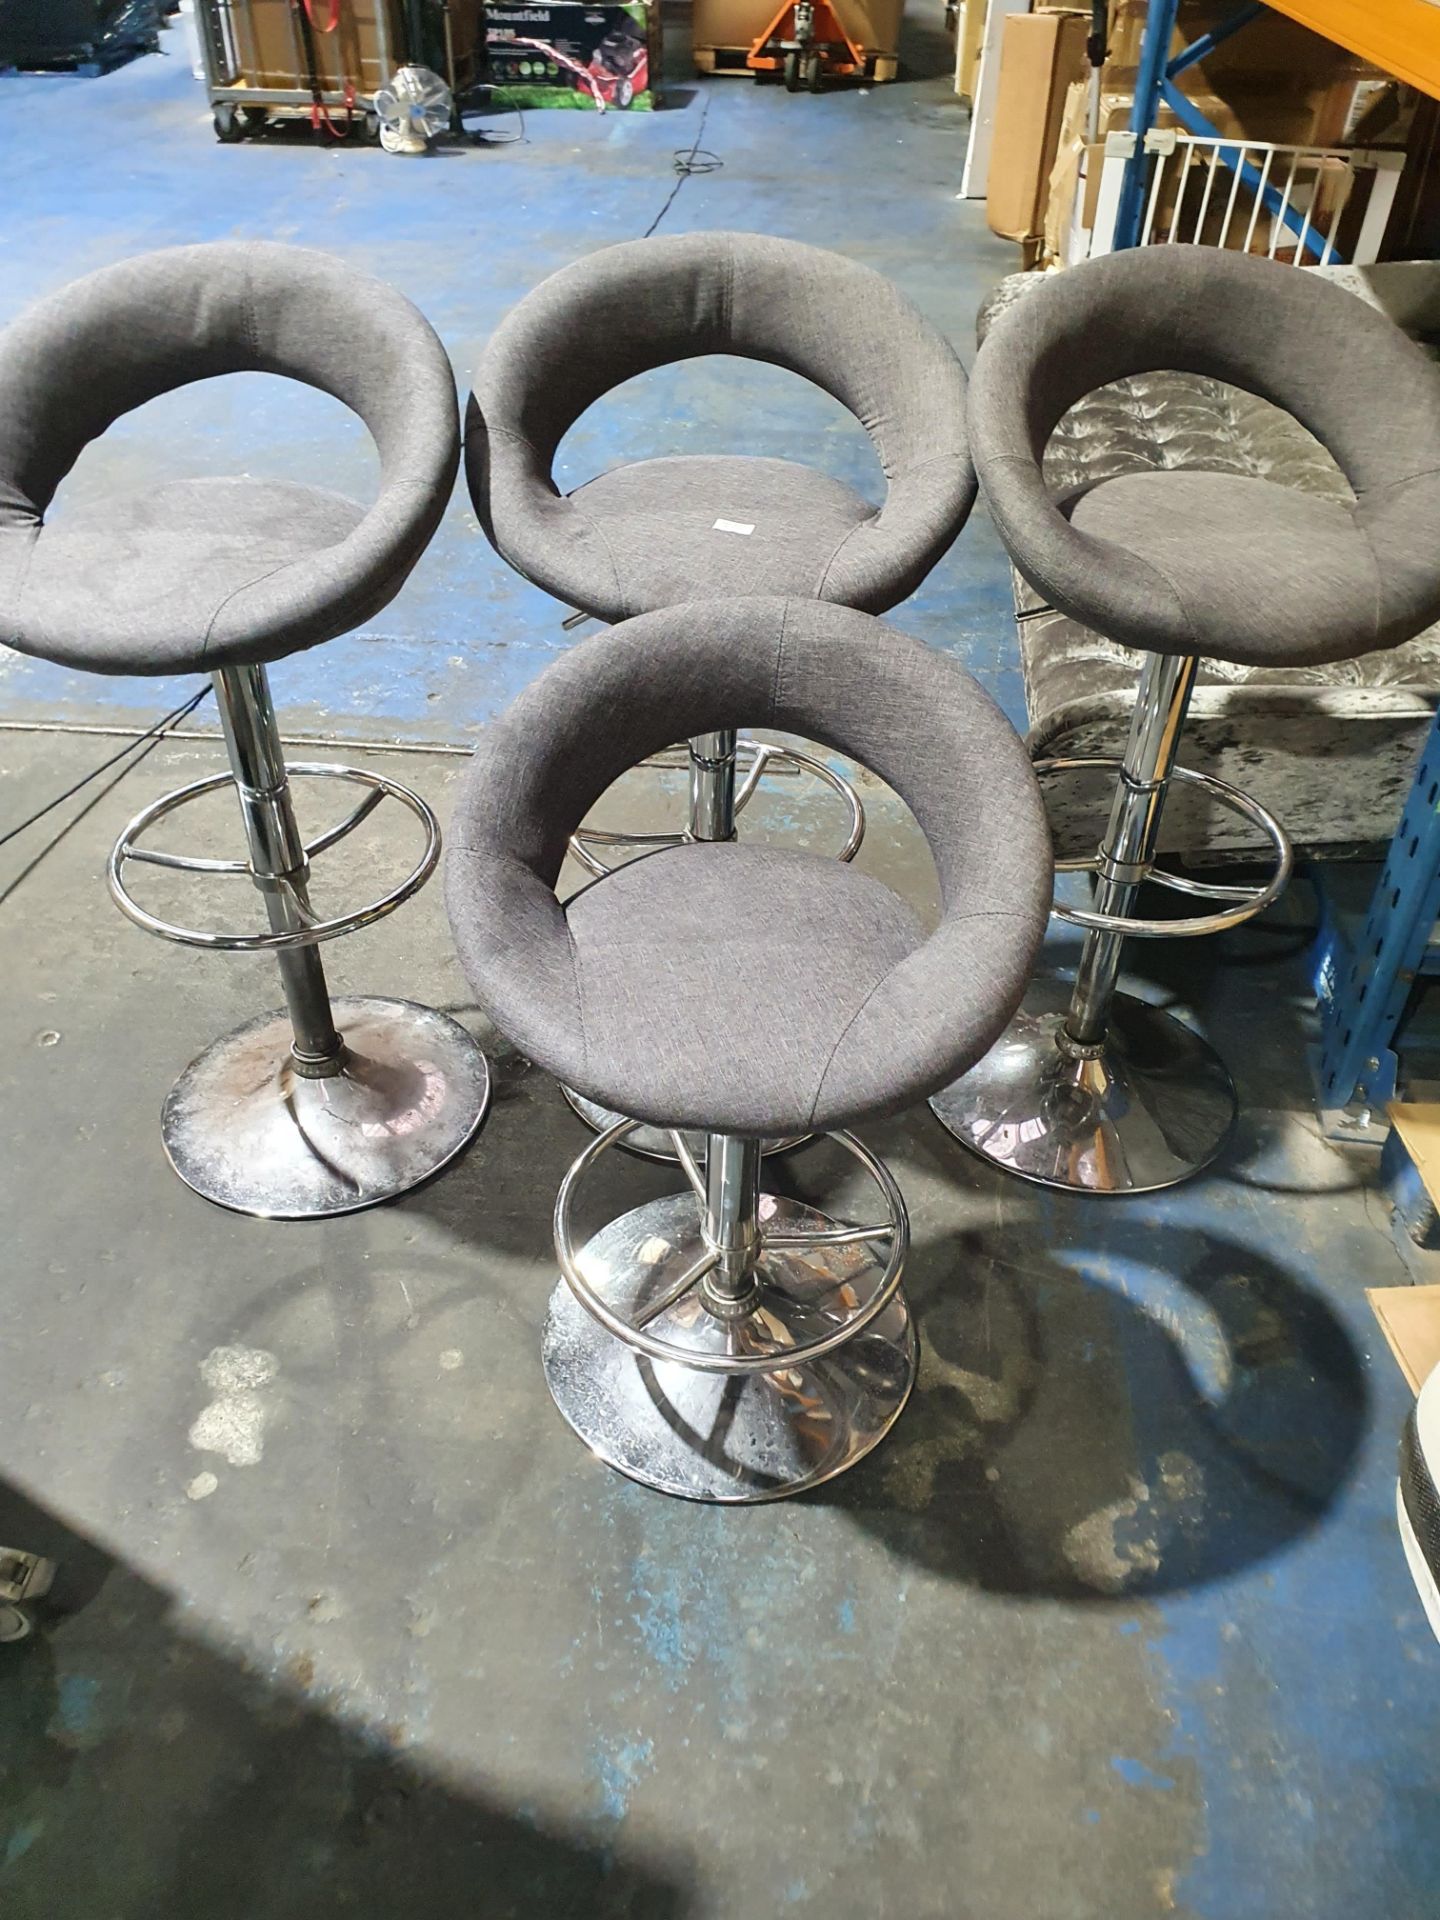 X 4 GREY BAR STOOLS Condition ReportAppraisal Available on Request - All Items are Unchecked/